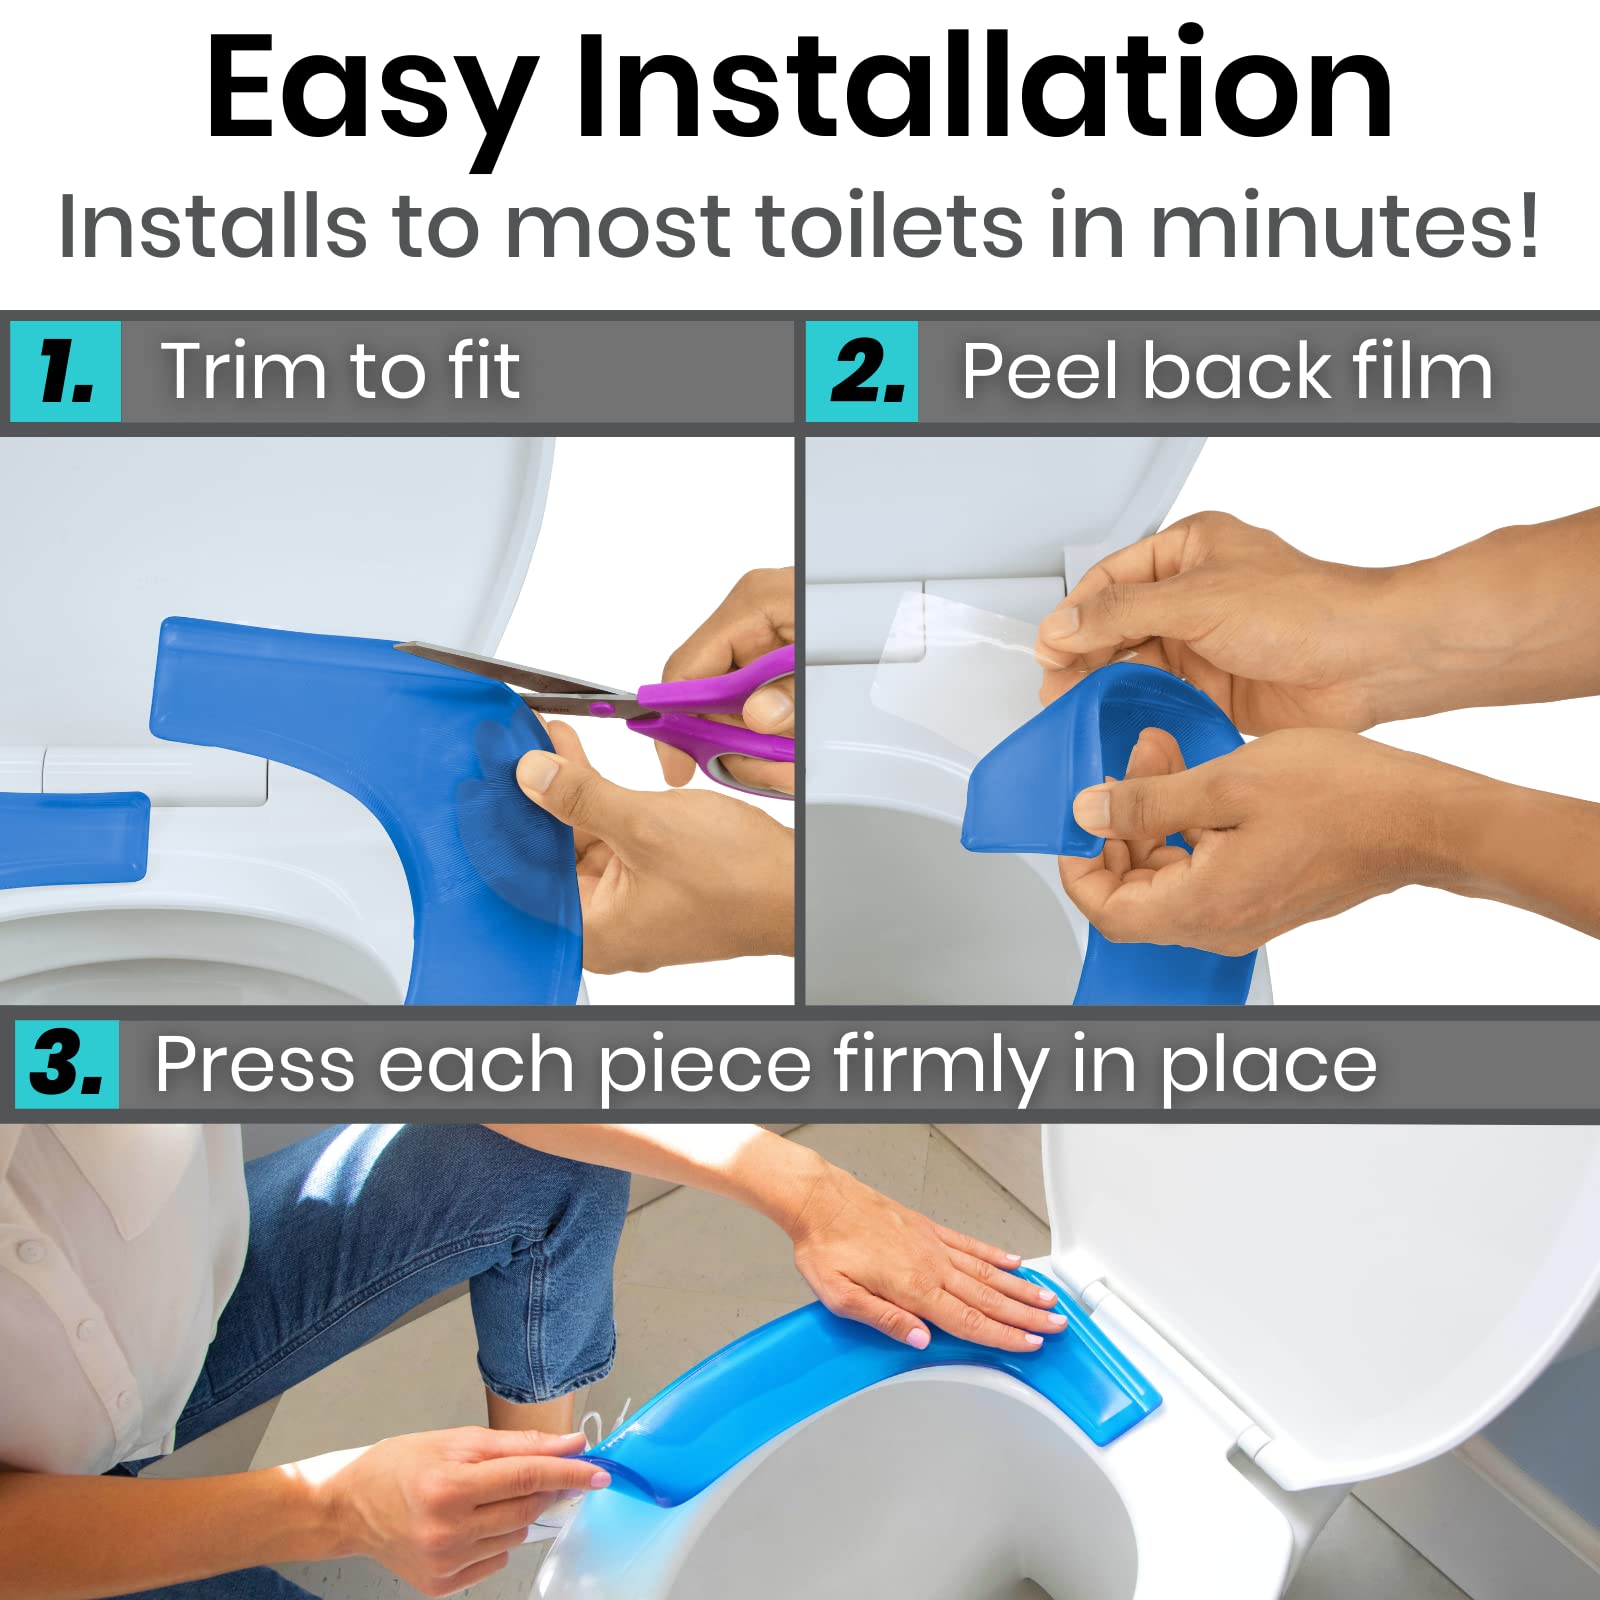 Vive Gel Toilet Seat Cushion Cover - Fits Elongated and Standard Toilet Models - Adhesive Padded Cushions for Pressure Relief (Blue)